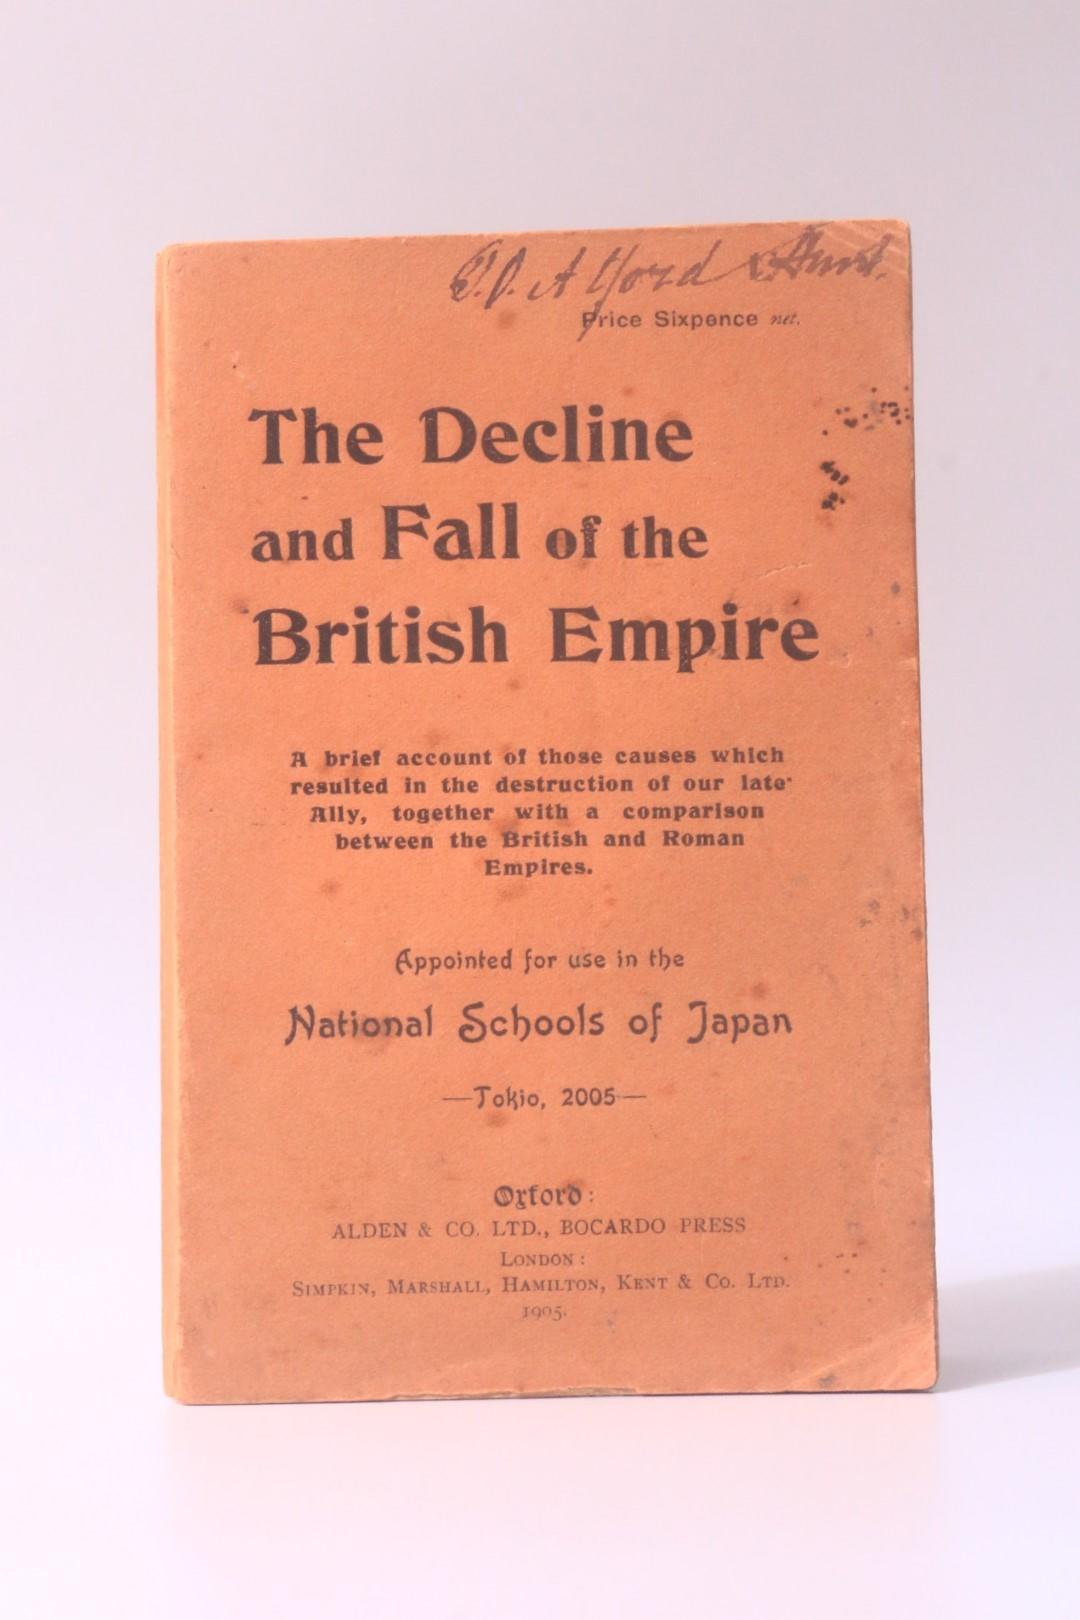 Anonymous [Elliott Evans Mills] - The Decline and Fall of the British Empire - Alden & Co, and Simpkin, Marshall, Hamilton, Kent & Co., 1905, First Edition.